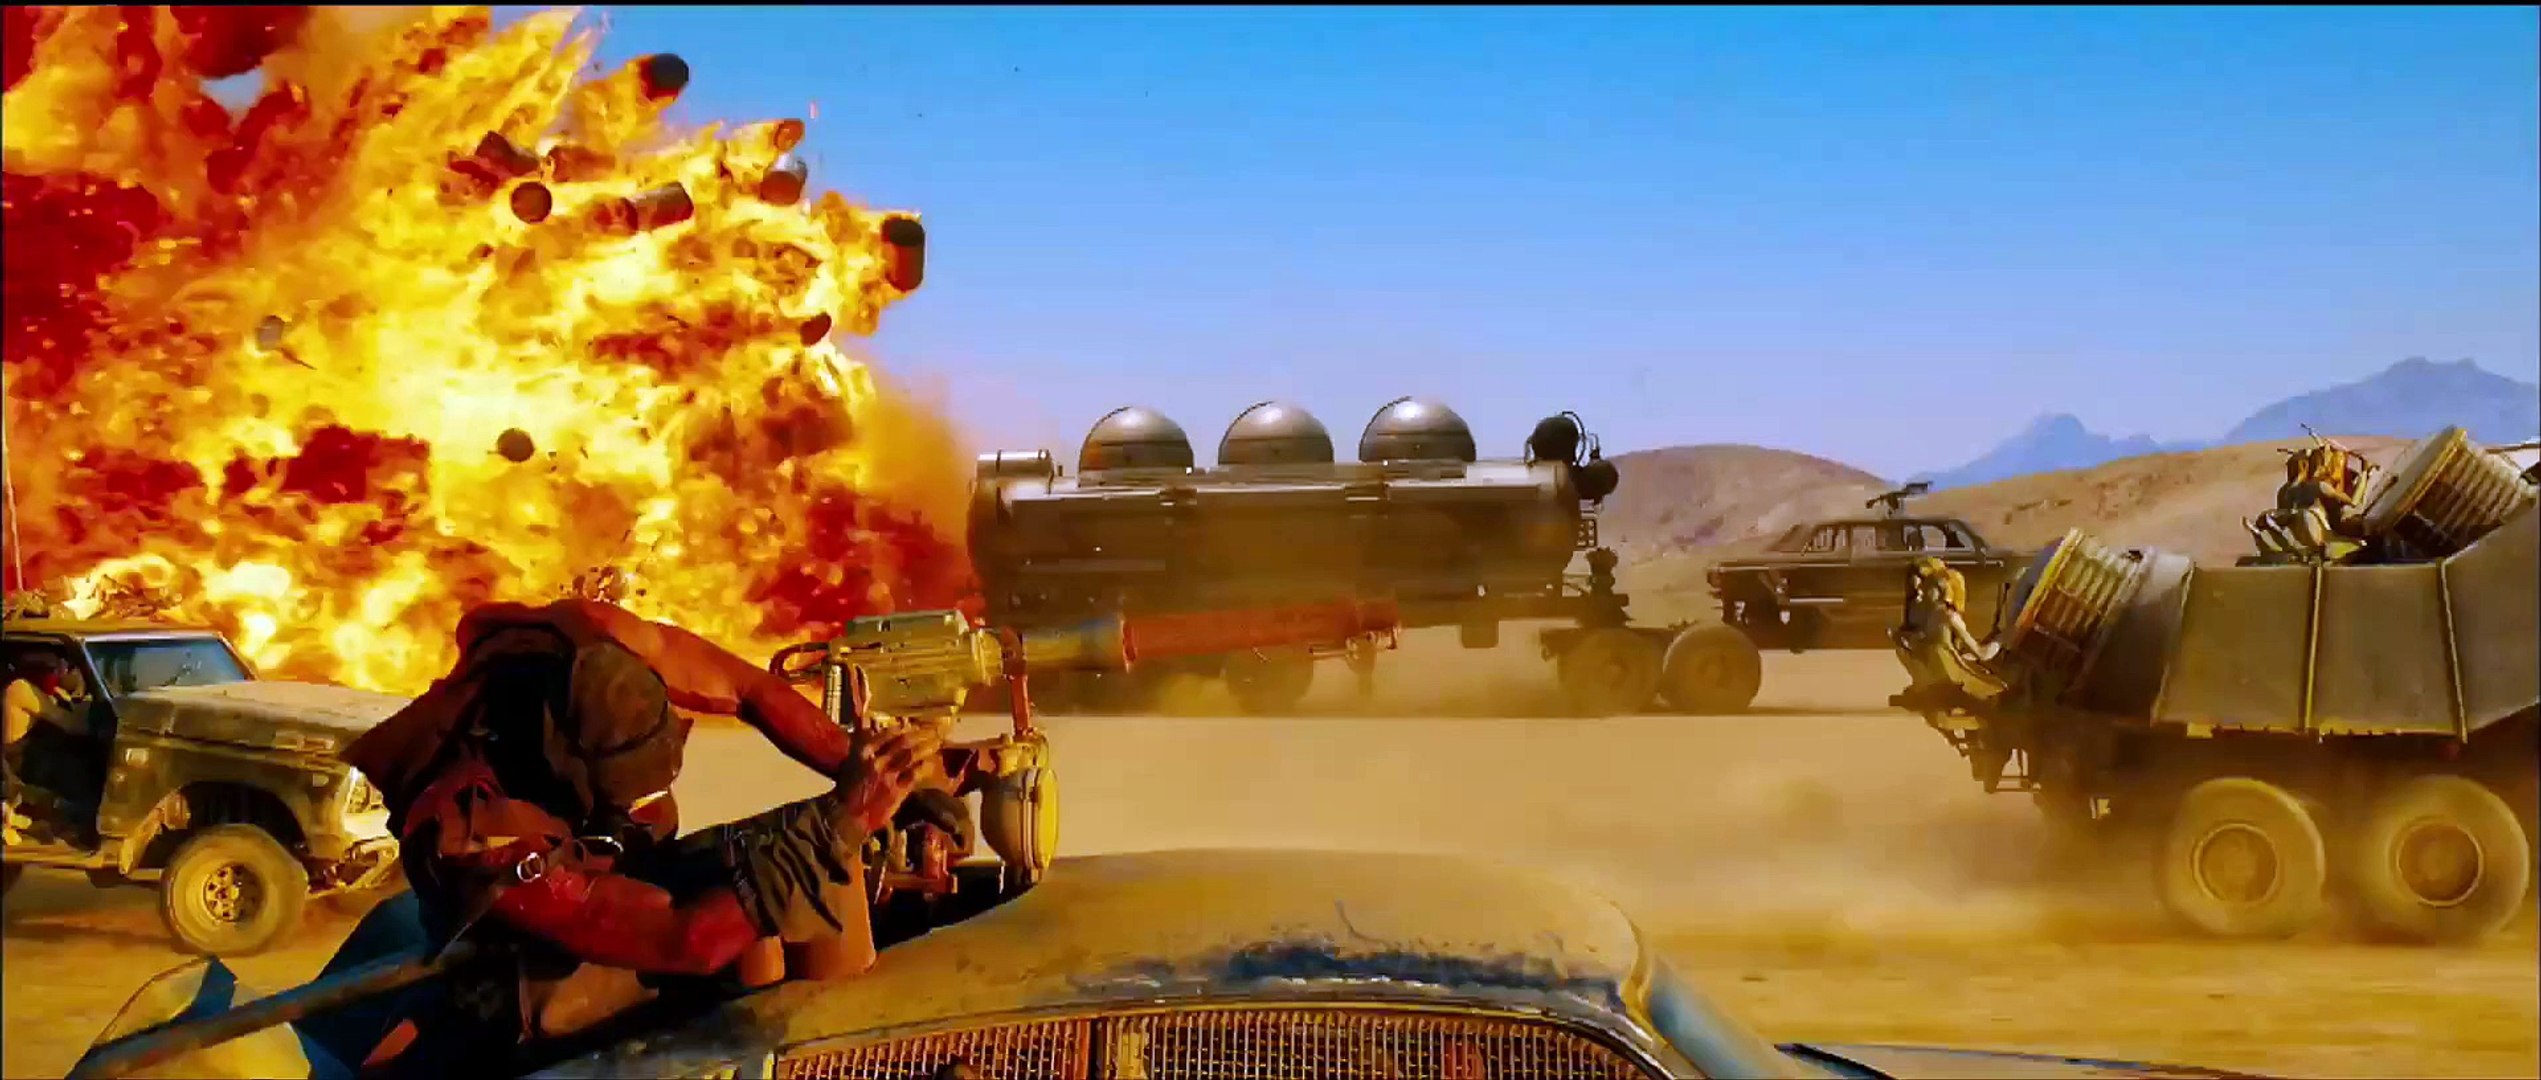 Mad Max - bande-annonce internationale - Vidéo Dailymotion